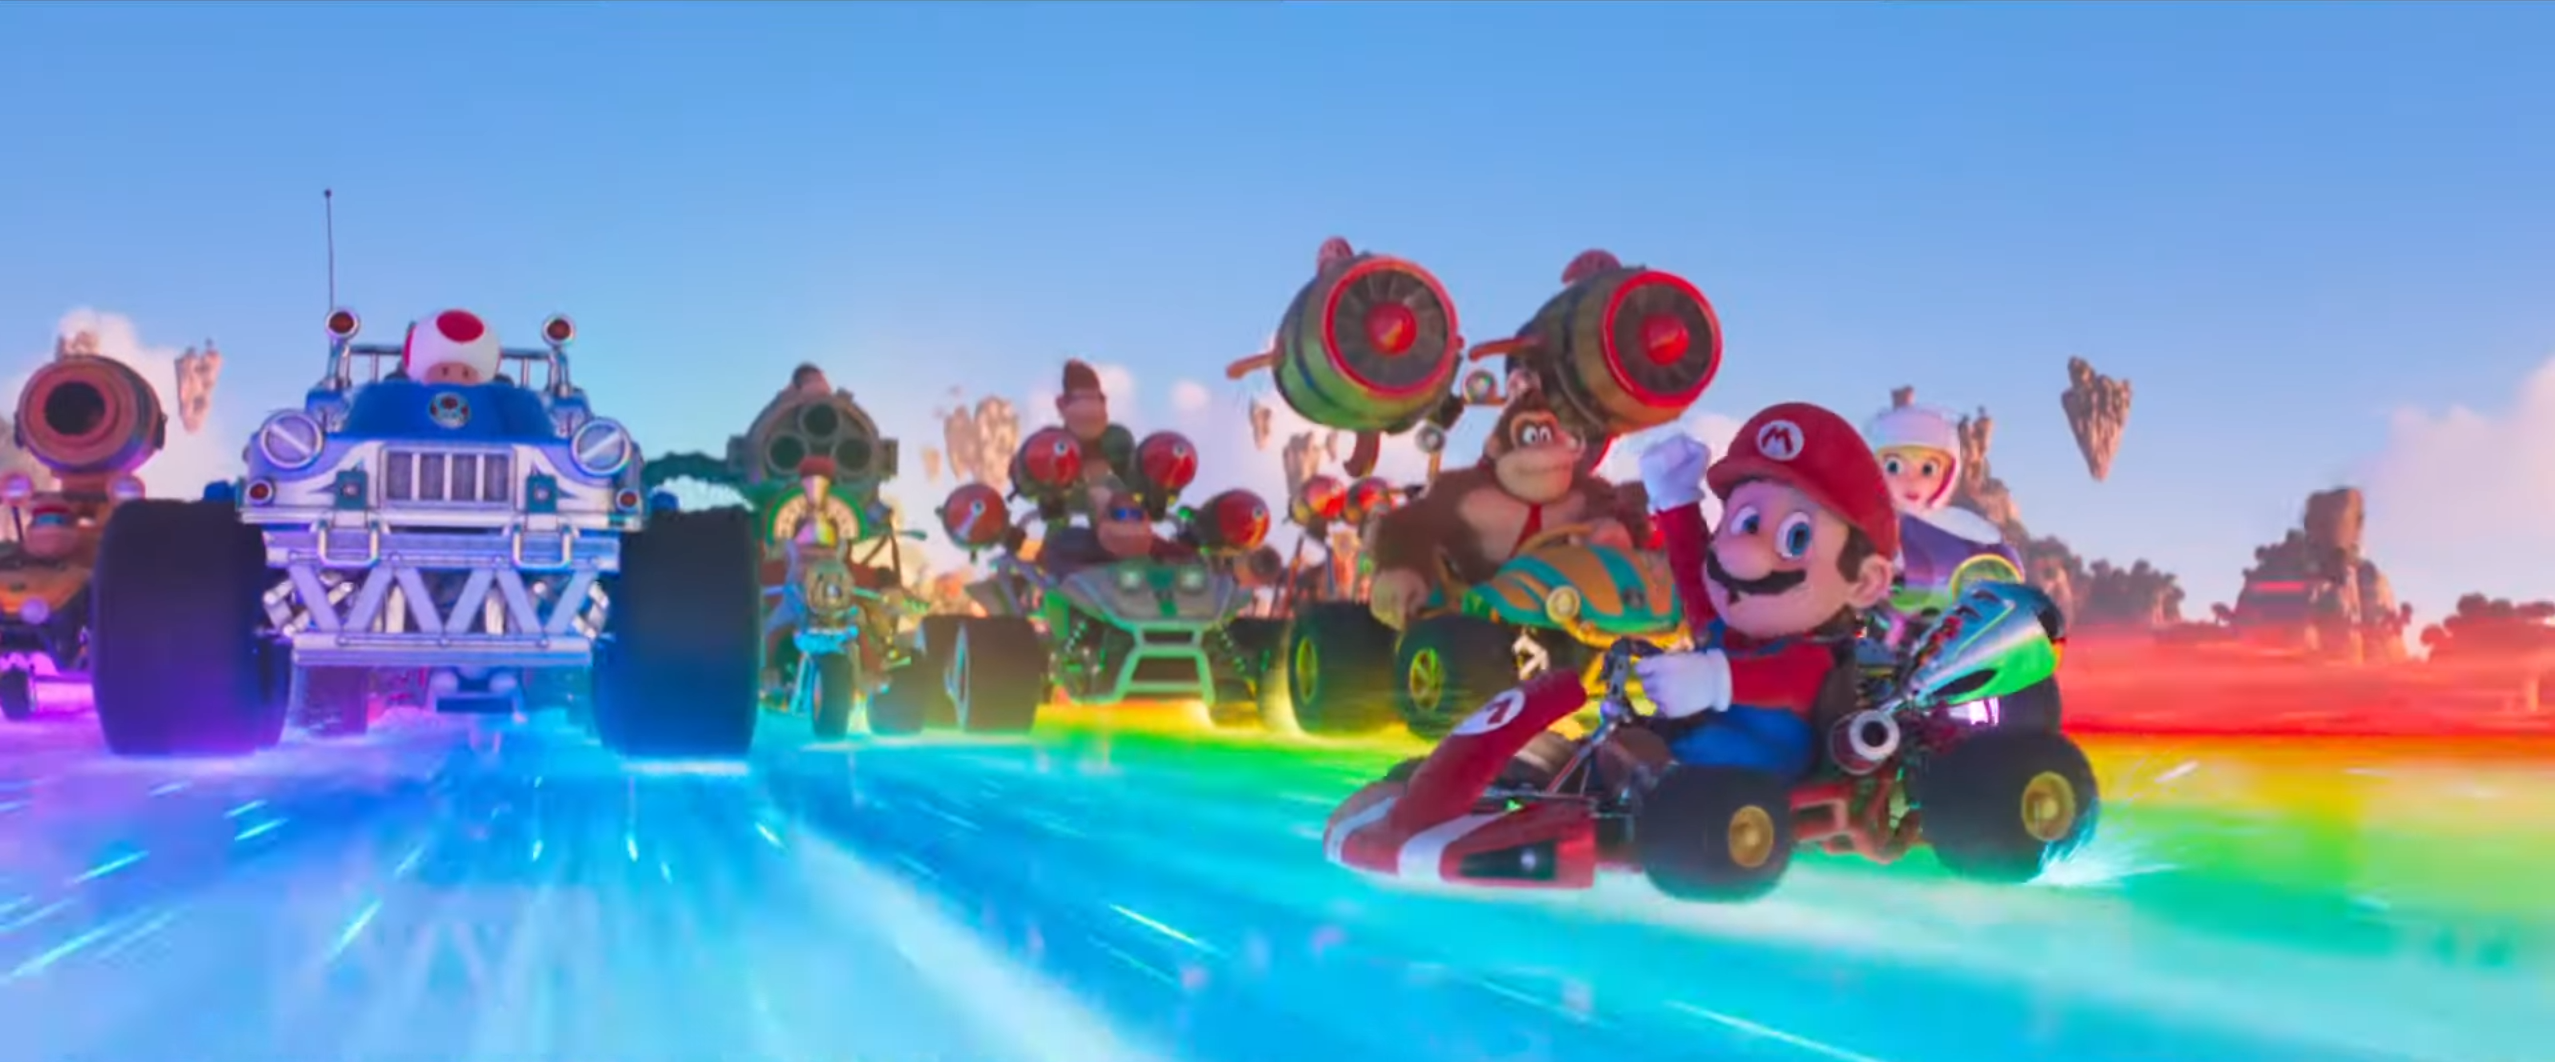 New Super Mario Bros. Trailer Features Peach, Donkey Kong